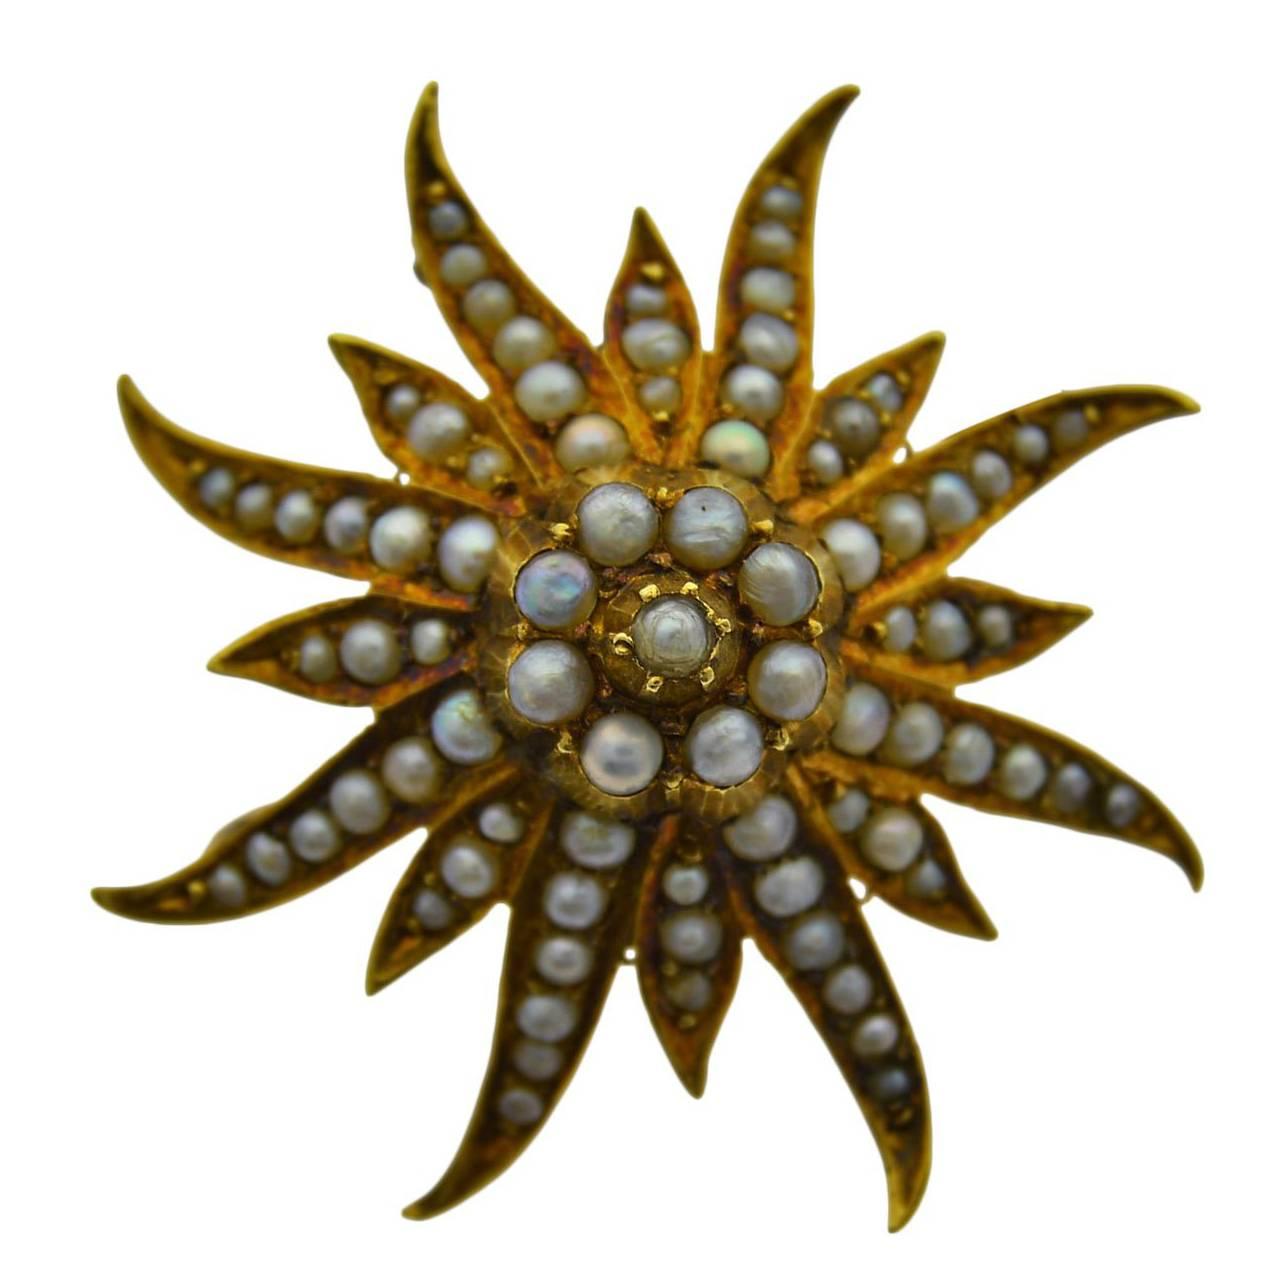 14 Karat Solid Yellow Gold Sea Anemone, Starfish or the Sun For Sale